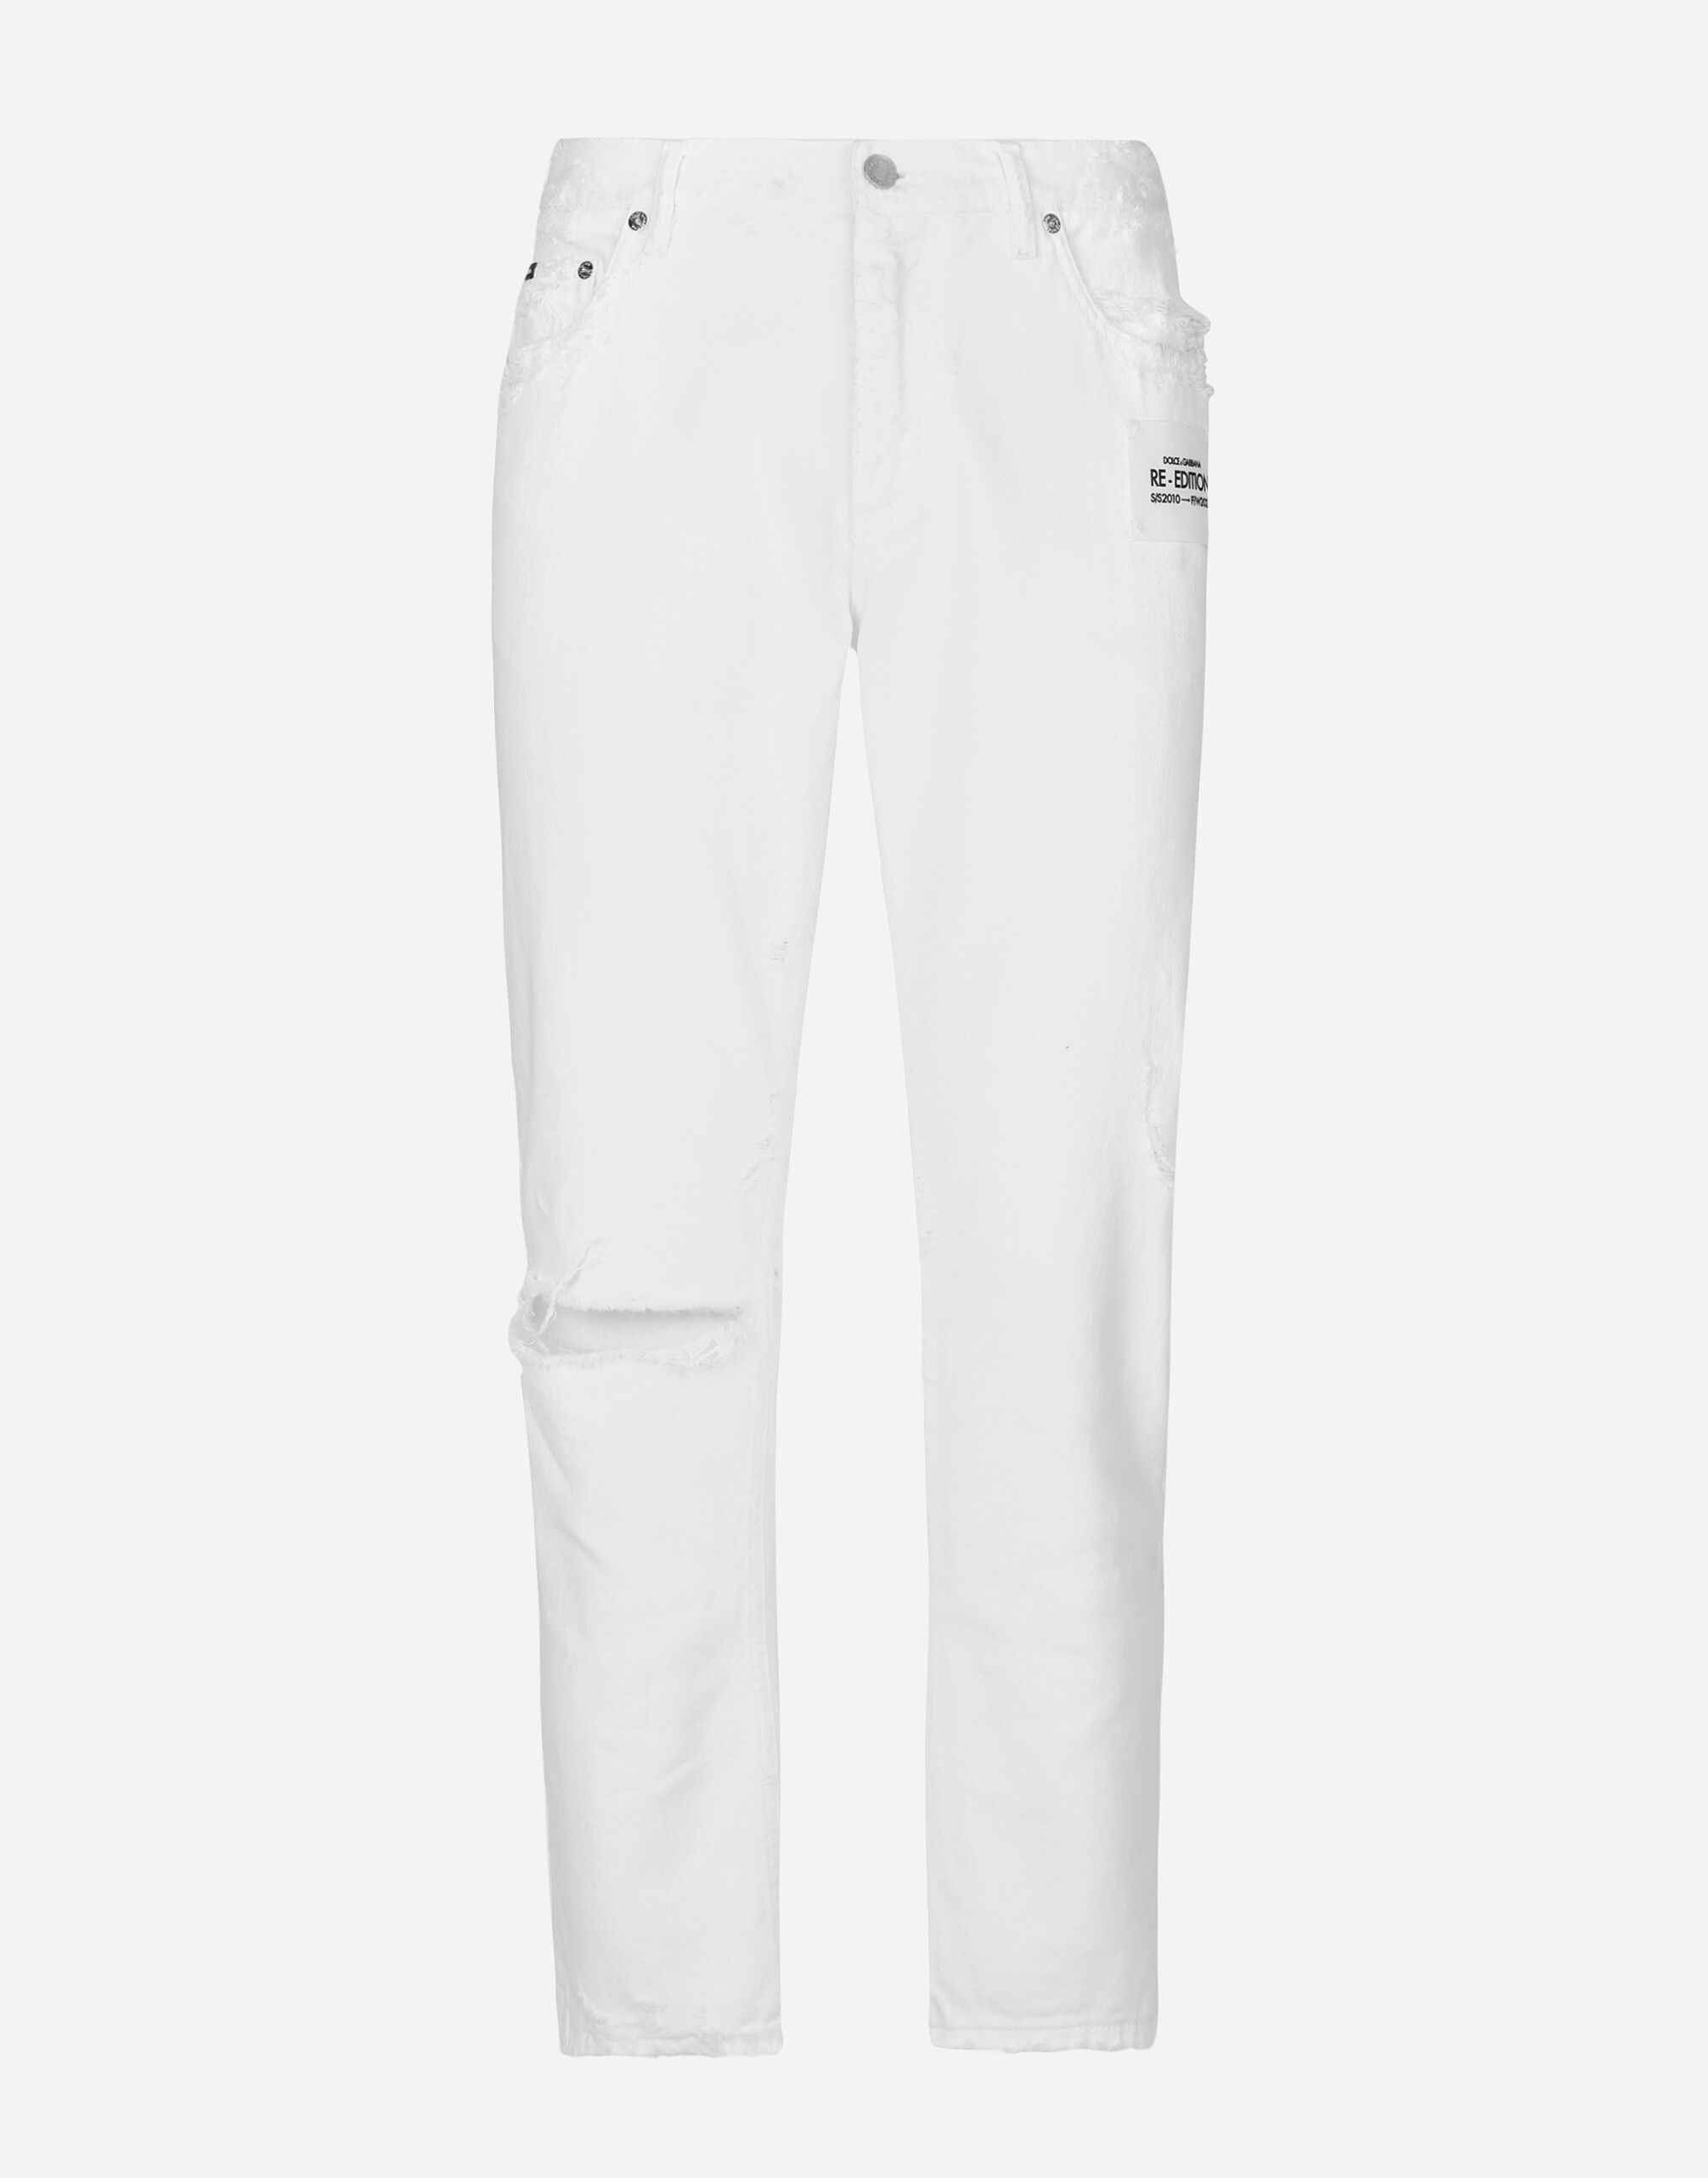 ${brand} Loose white jeans with rips and abrasions ${colorDescription} ${masterID}